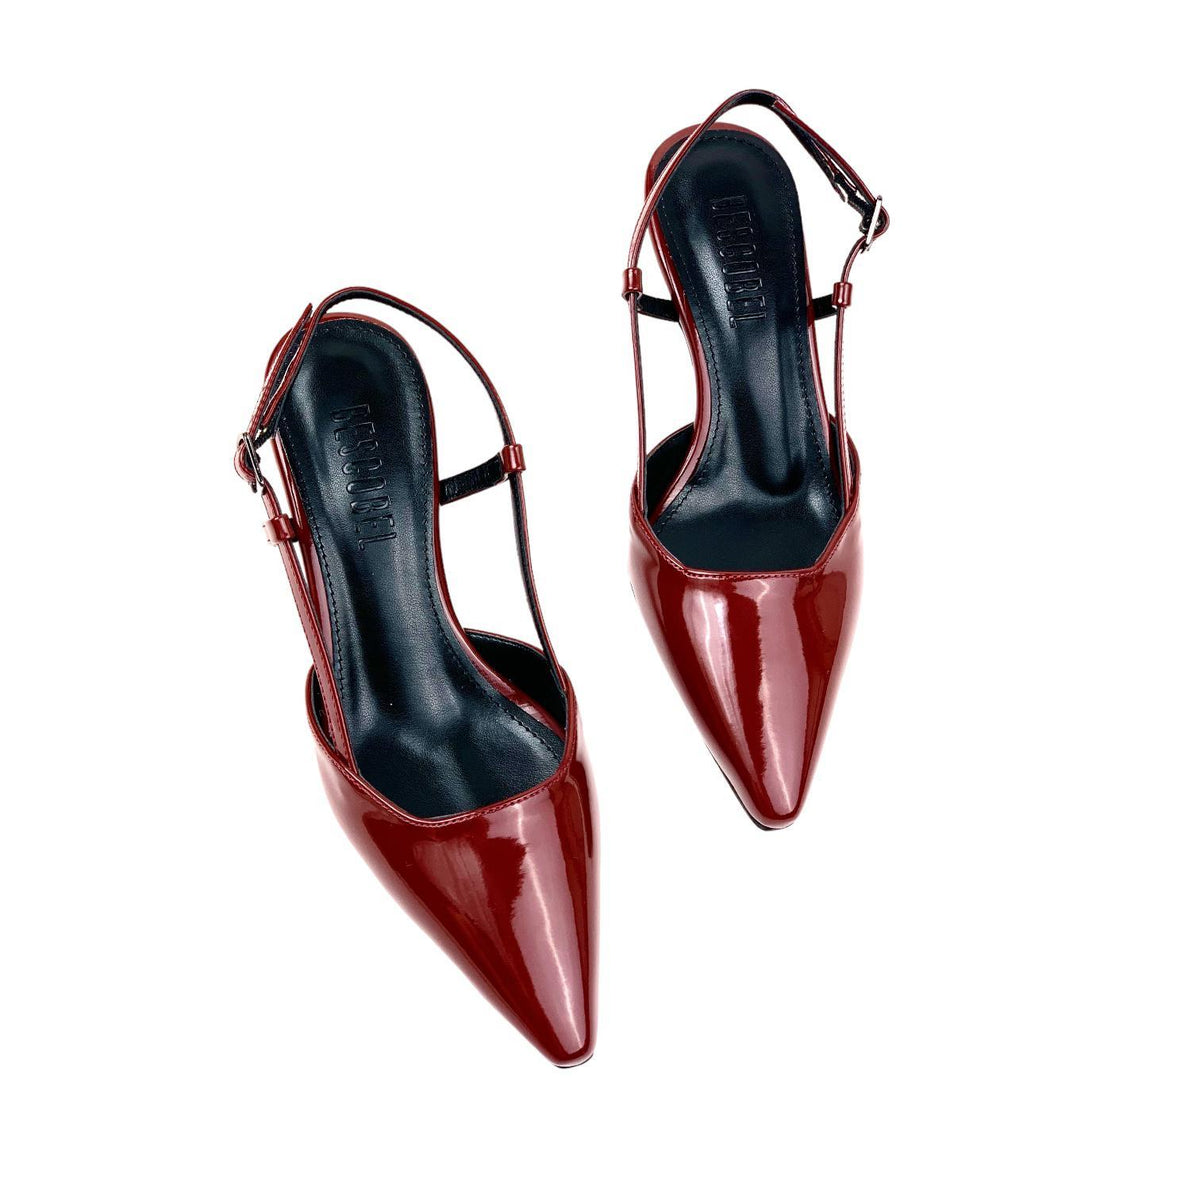 Women's Sedj Burgundy Patent Leather Material Open Back Almond Heel Shoes 5.5 Cm - STREETMODE ™